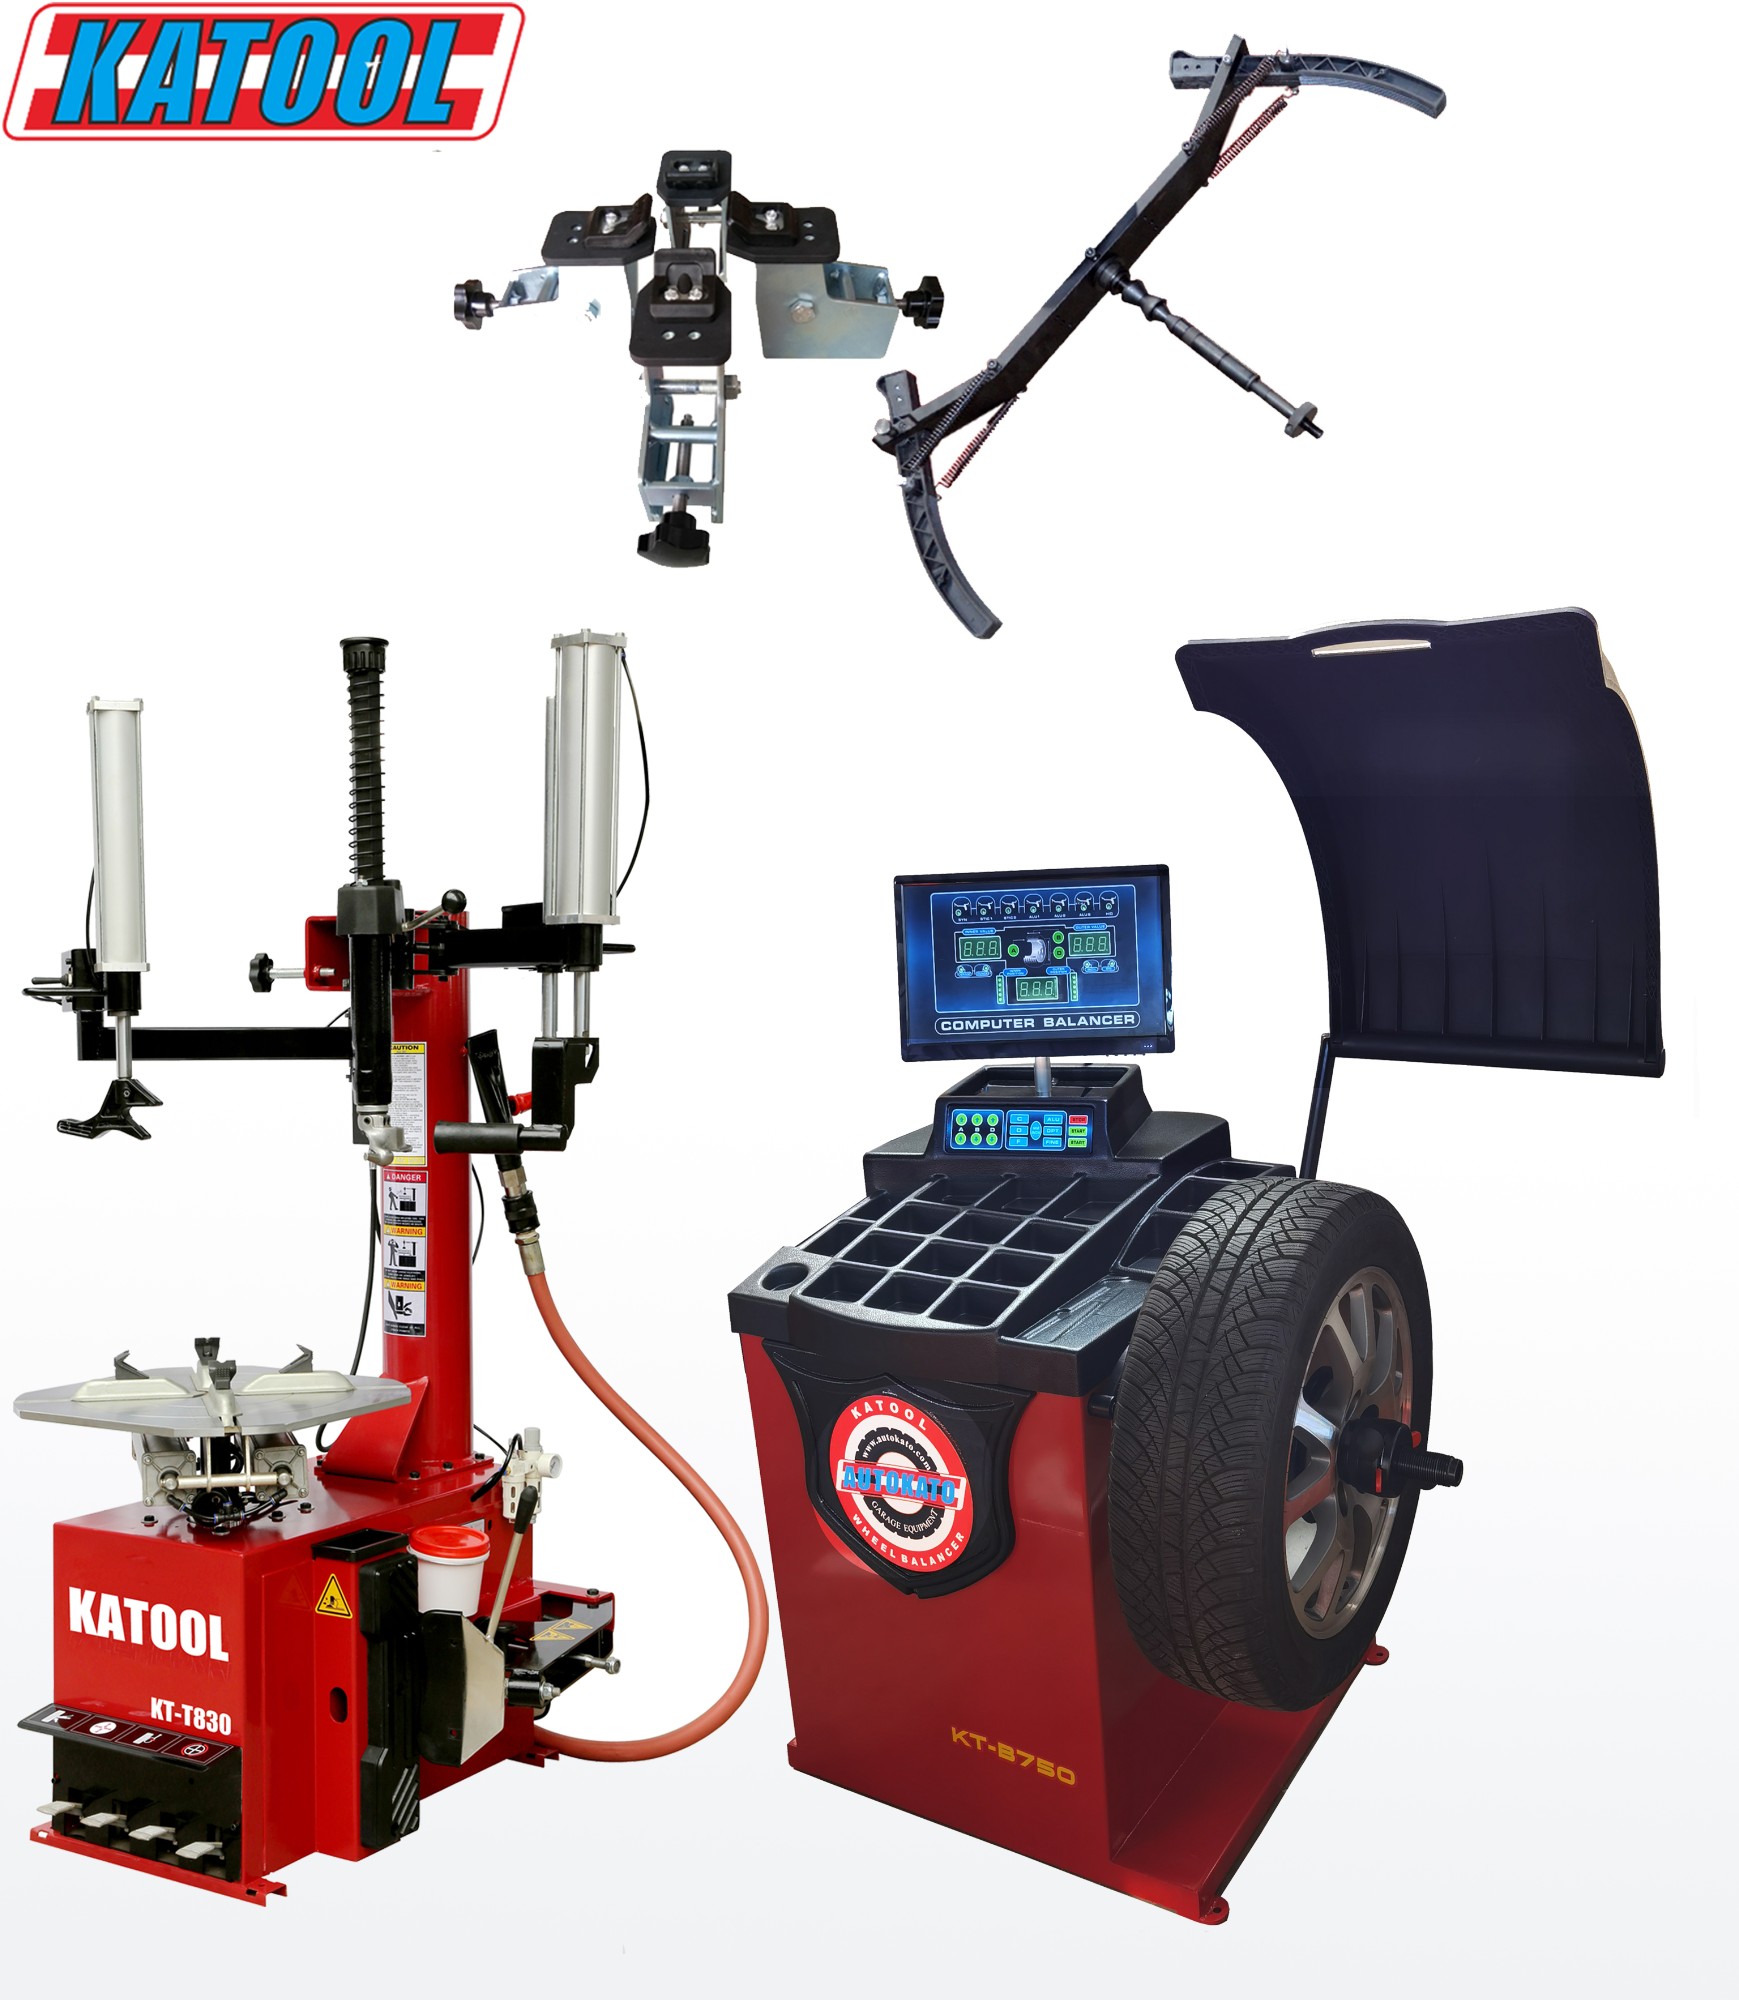 Tire changer 830 and wheel balancer 750 Combo with Motorcycle Adaptor